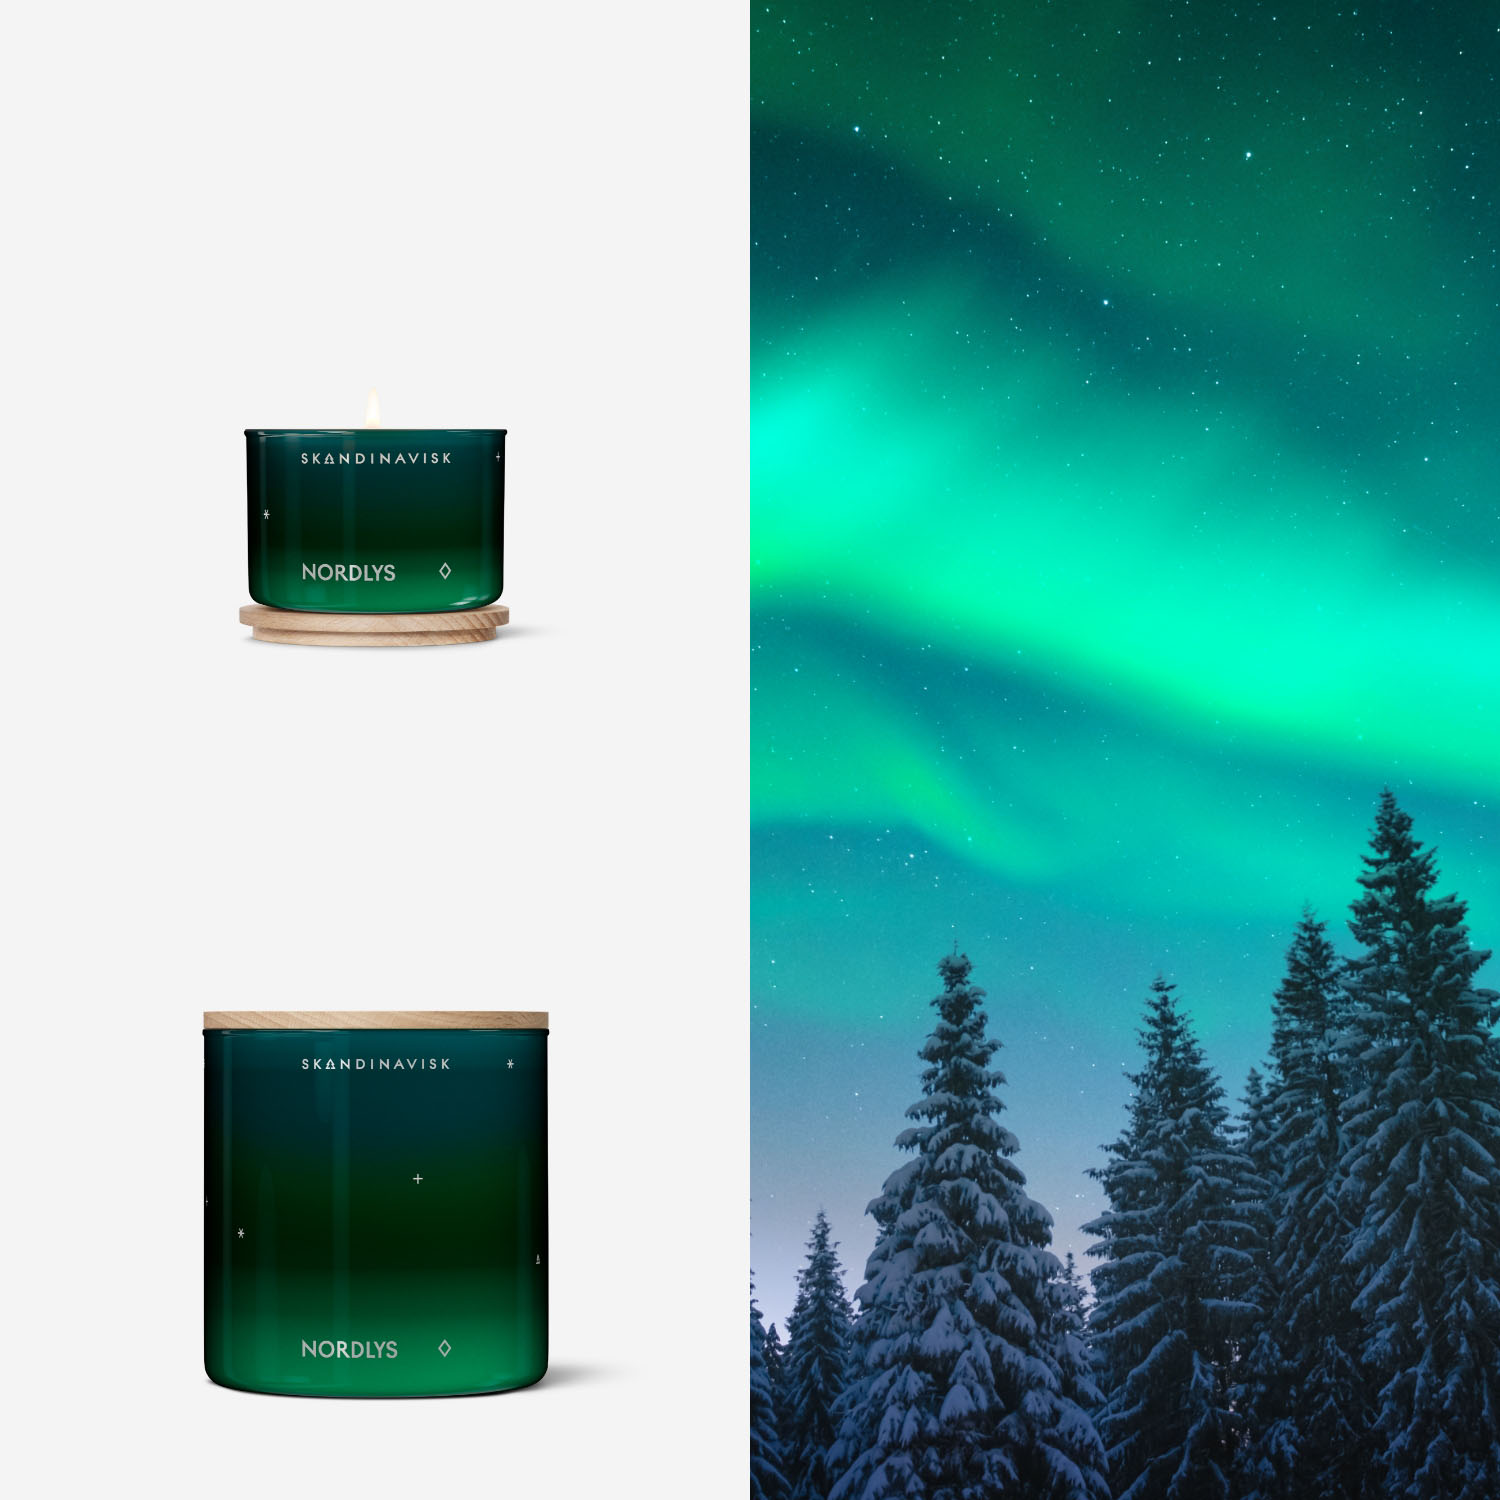 Christmas gift guide for friends - NORDLYS scented candle by SKANDINAVISK